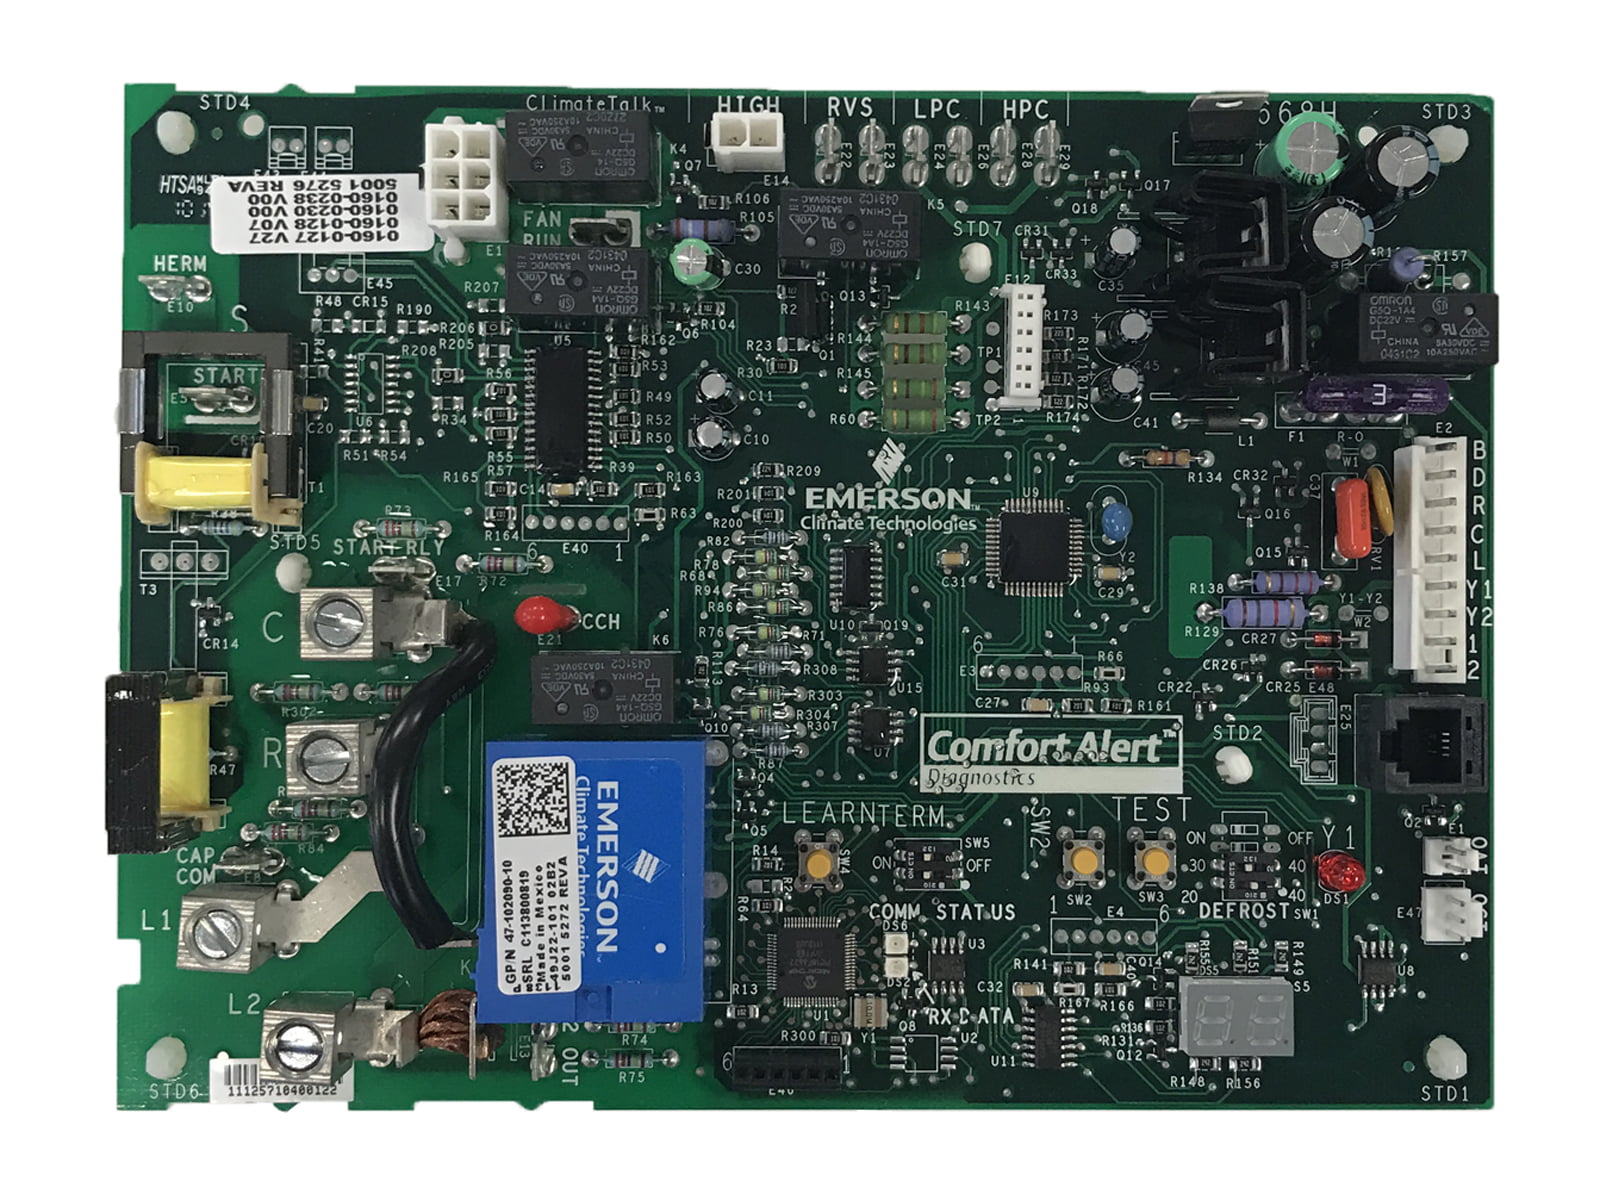 47-102090-02 OEM Upgraded Replacement for Rheem Furnace Control Board